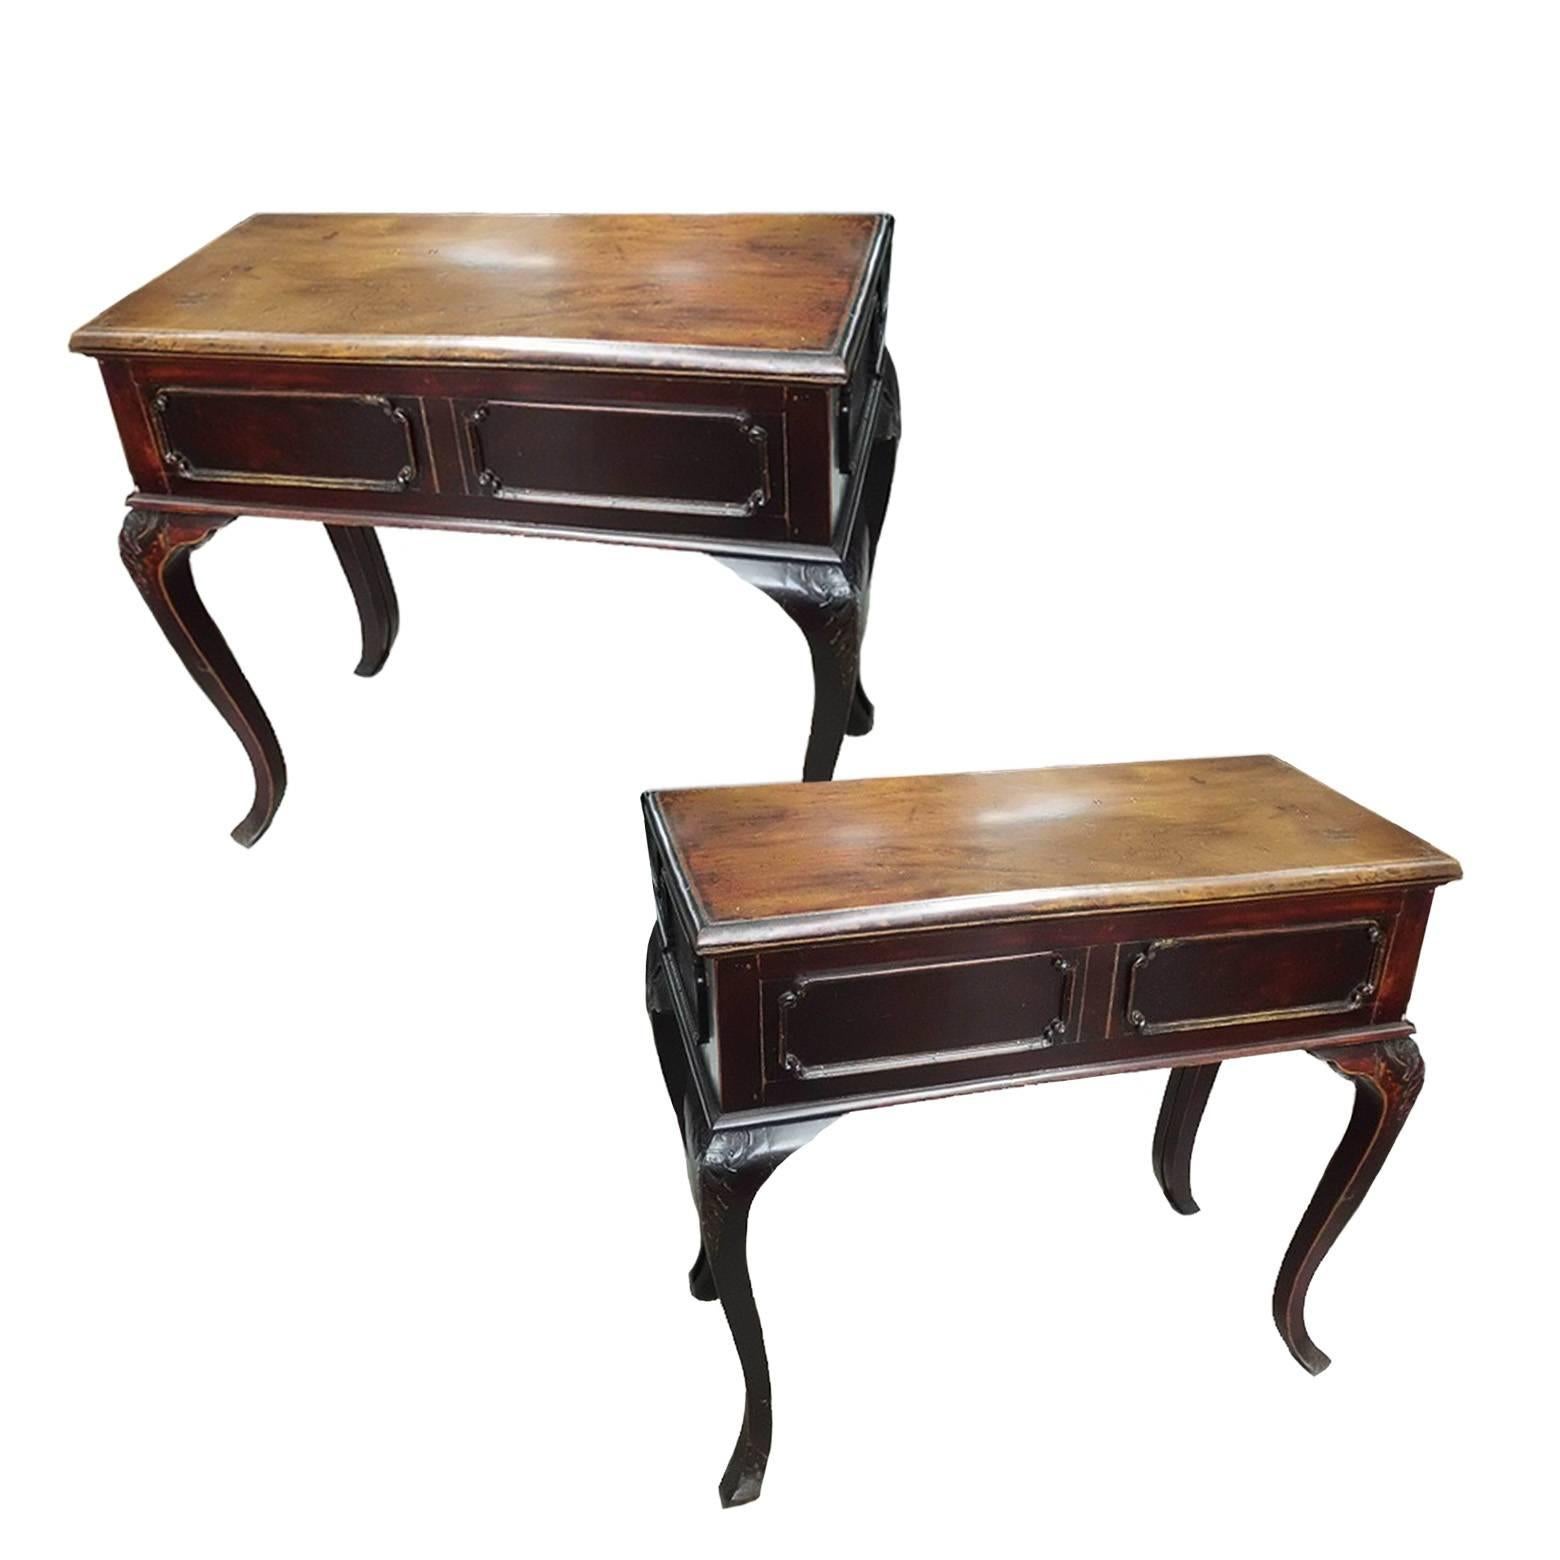 A pair of beautiful tables with solid, single board tops and elegant flared legs. Each table has a full depth drawer on the side. Legs carved with a foliage pattern. The tables can be put together to form a square table, very convenient shall a game